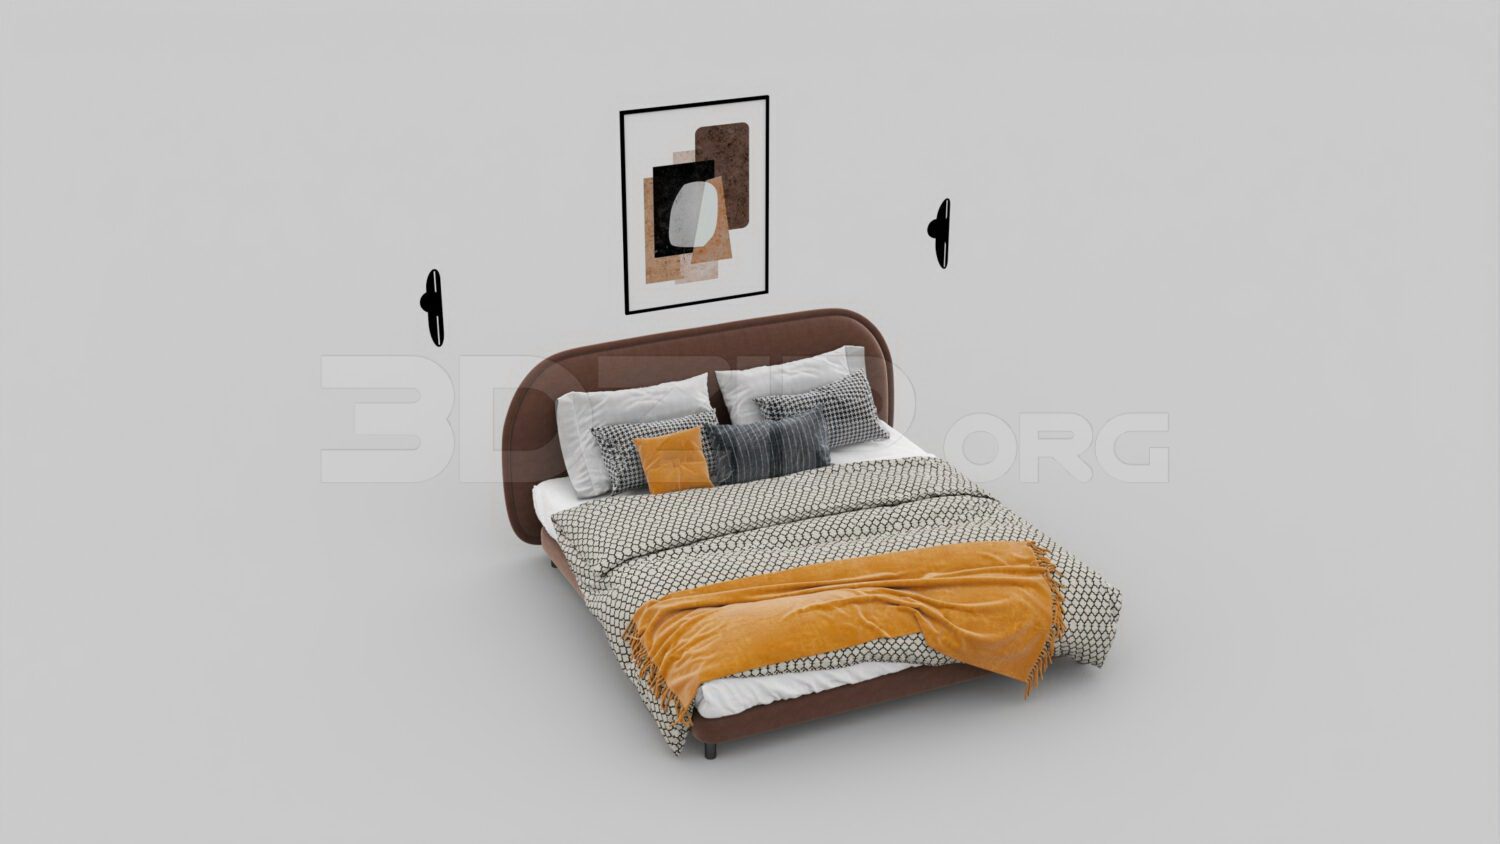 1182. Download Free Bed Model By Huy Hieu Lee